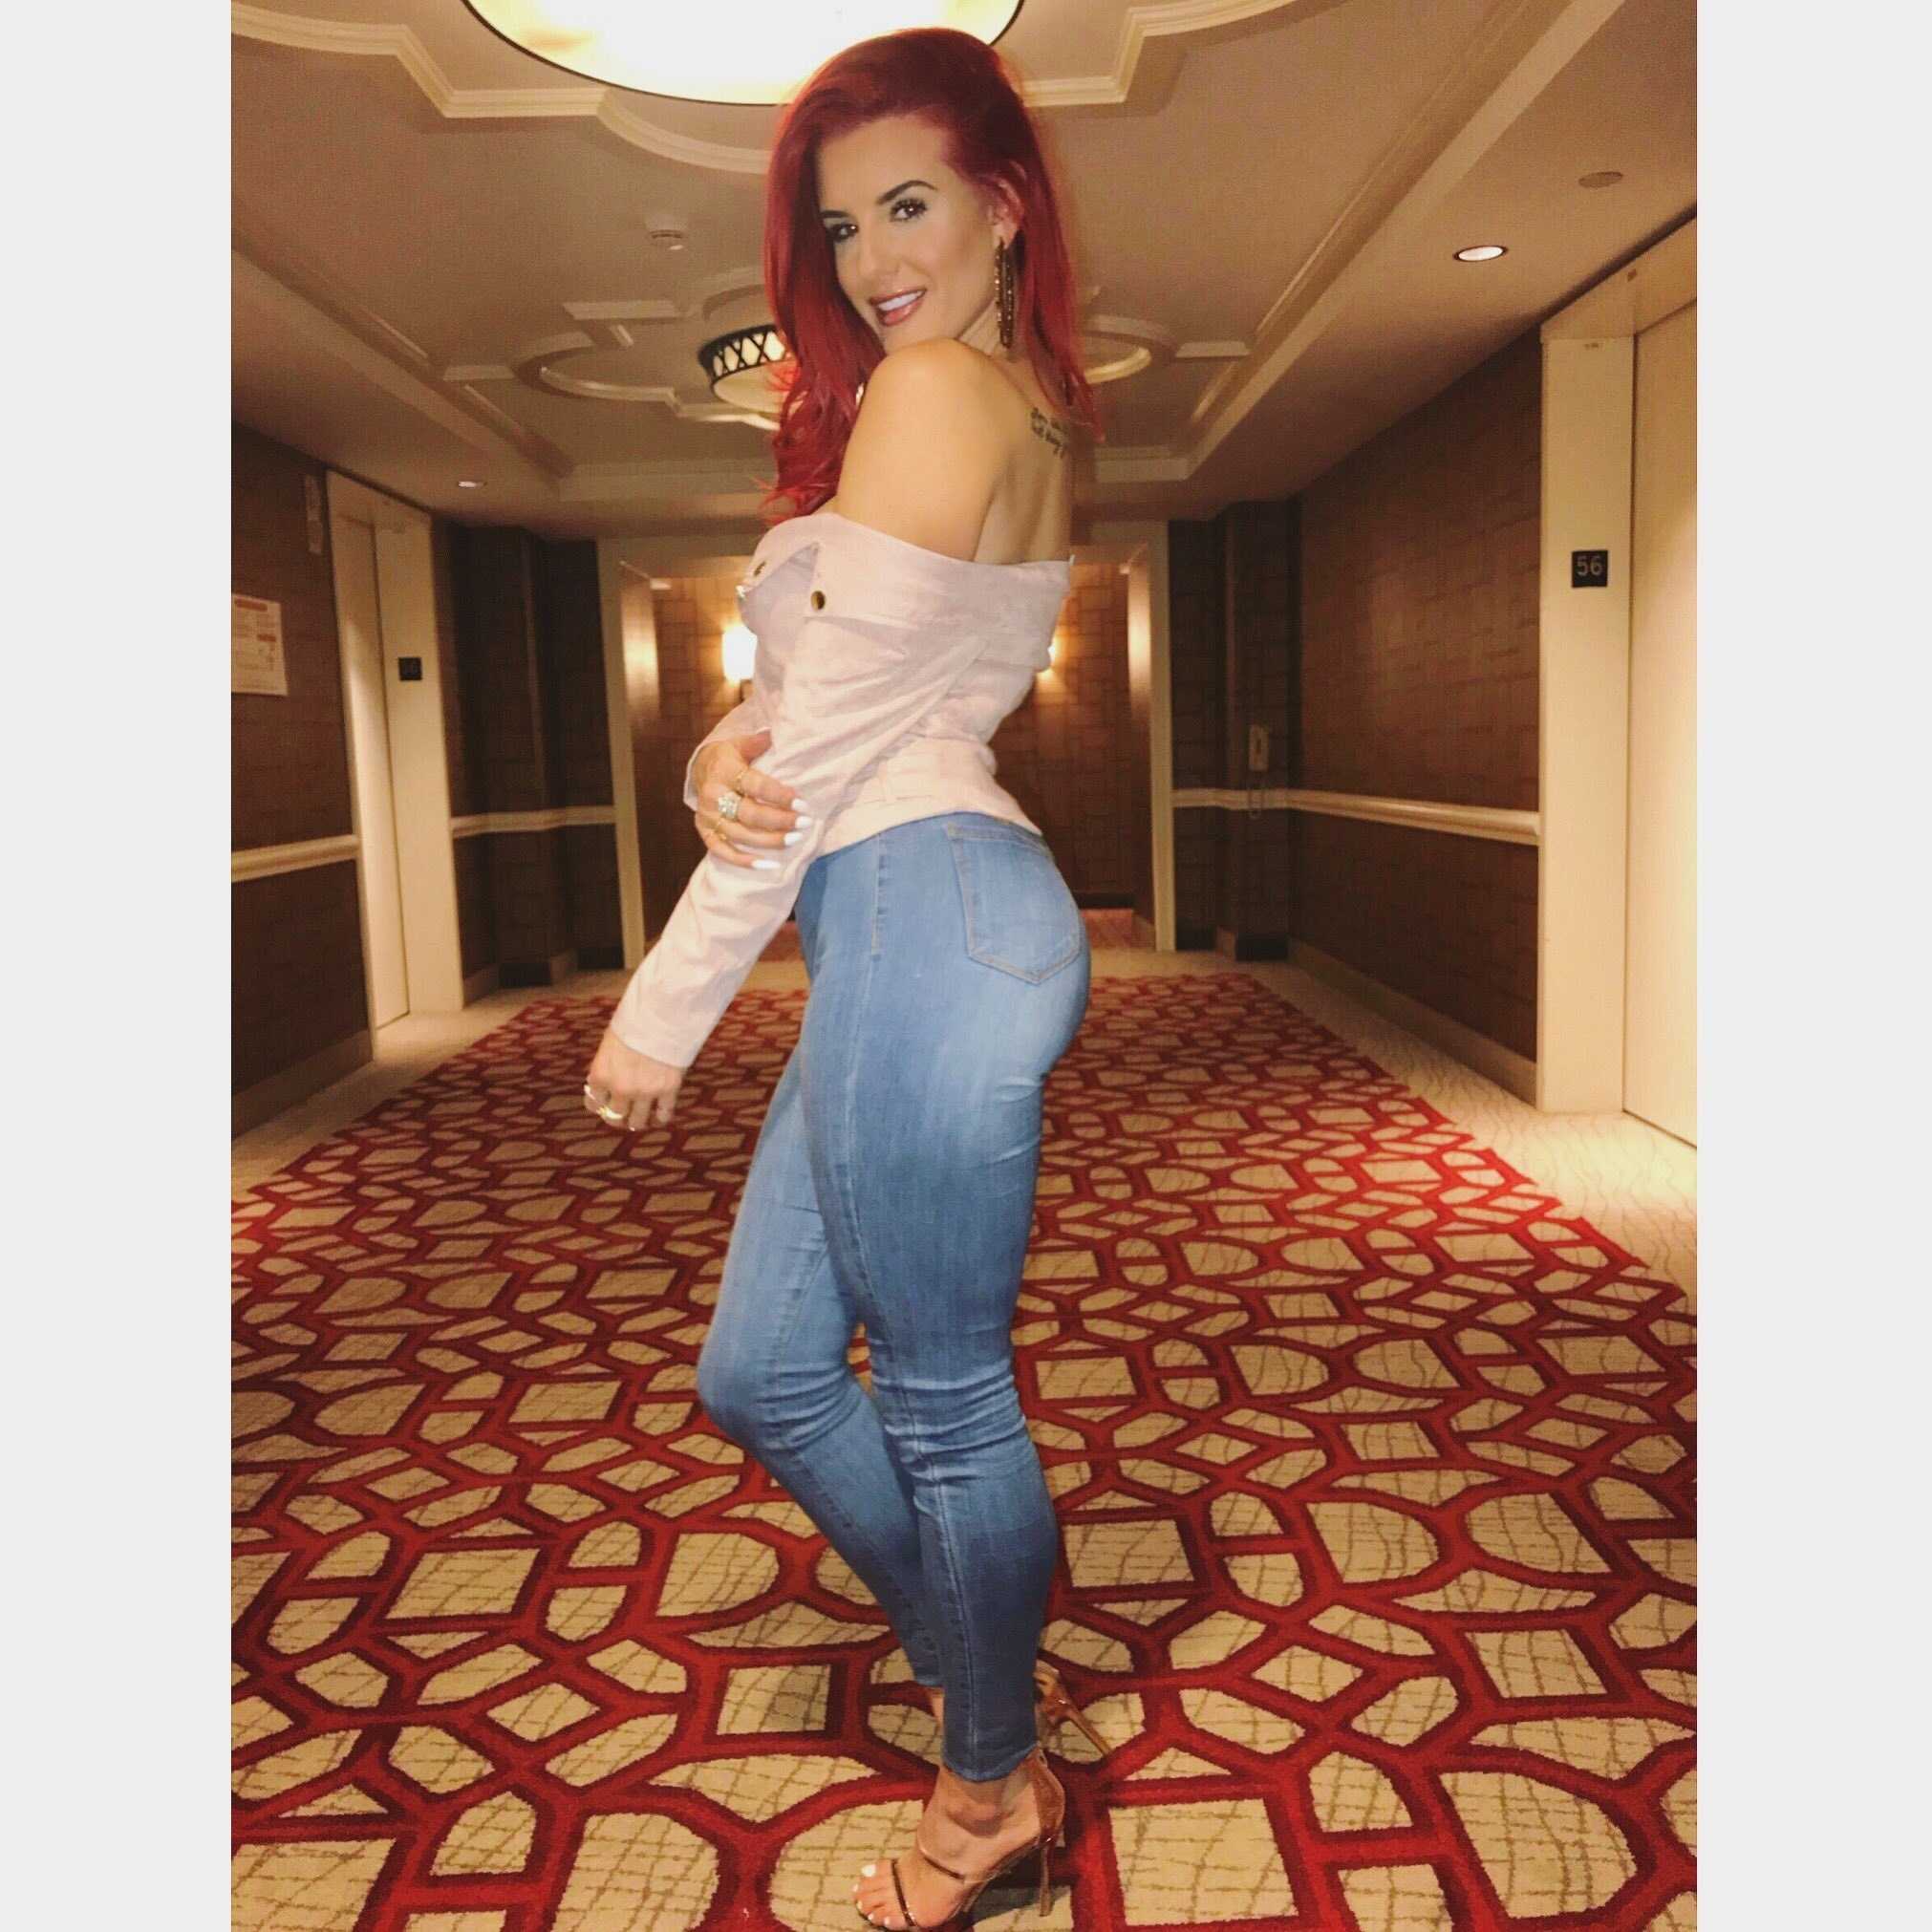 70+ Justina Valentine Hot Pictures Are Delight For Fans 11